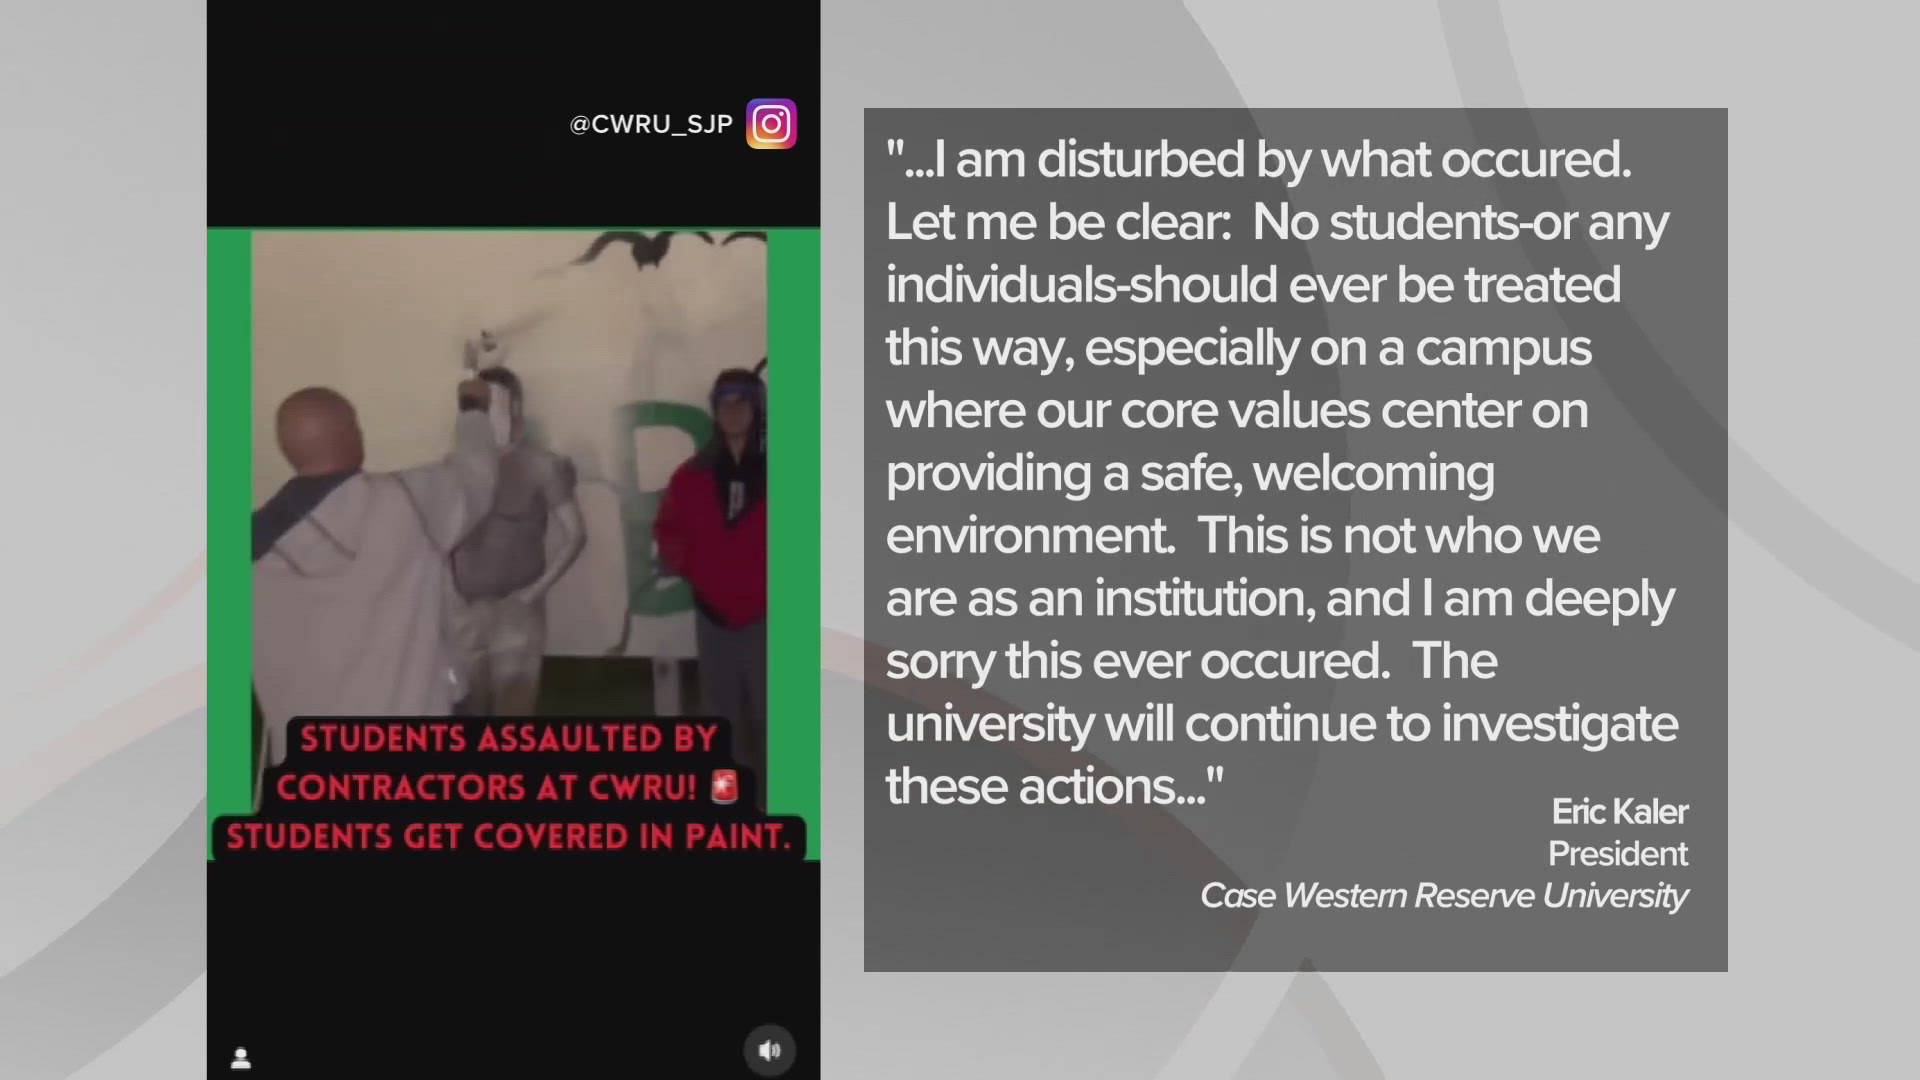 "This is not who we are as an institution, and I am deeply sorry this ever occurred," Case Western Reserve University President Eric Kaler said after the incident.